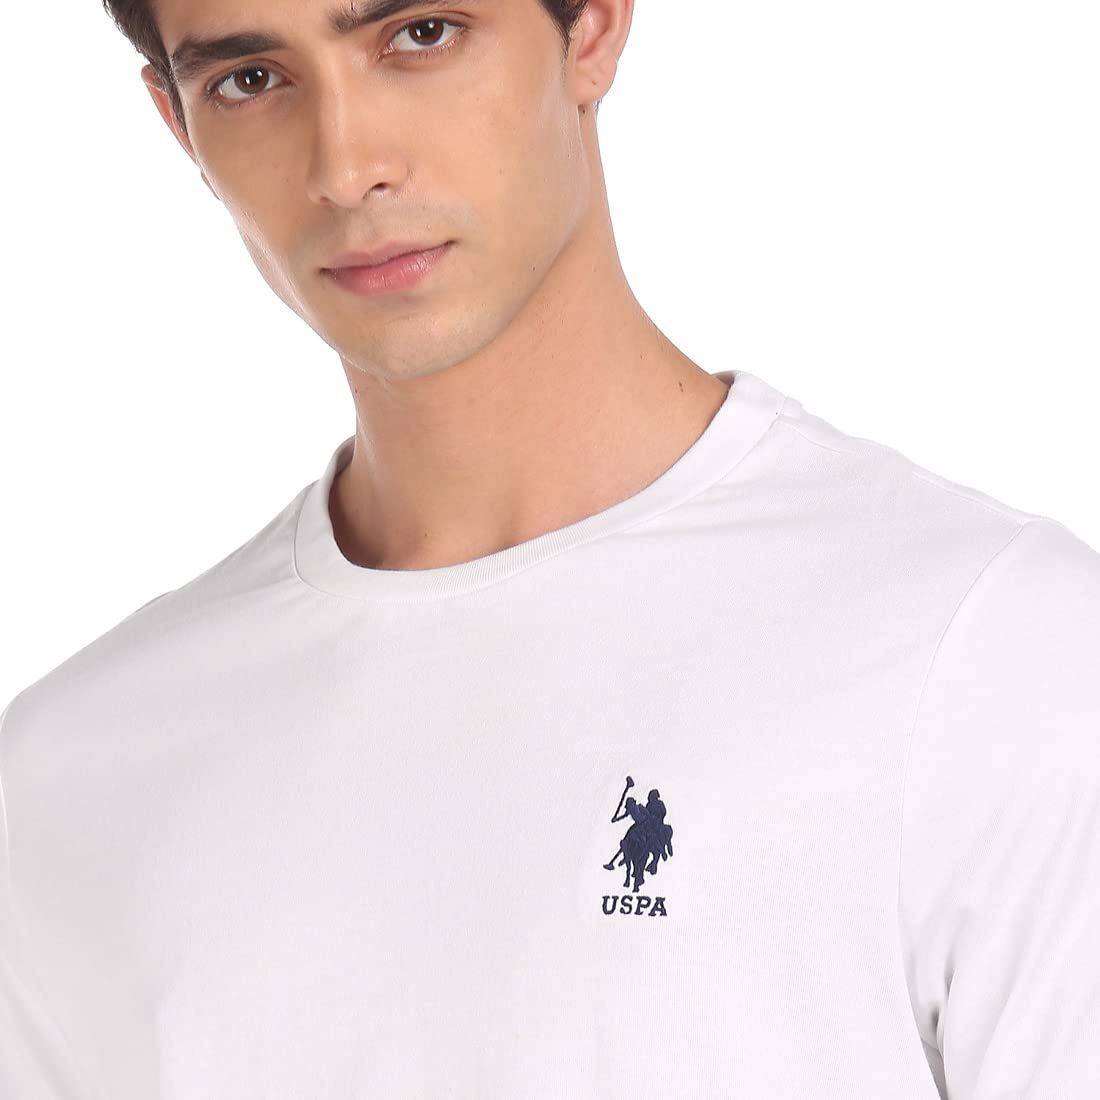 U.S. POLO ASSN. Men Pure Cotton Long Sleeve Solid I693 T-Shirt - Pack of 1 (White L)